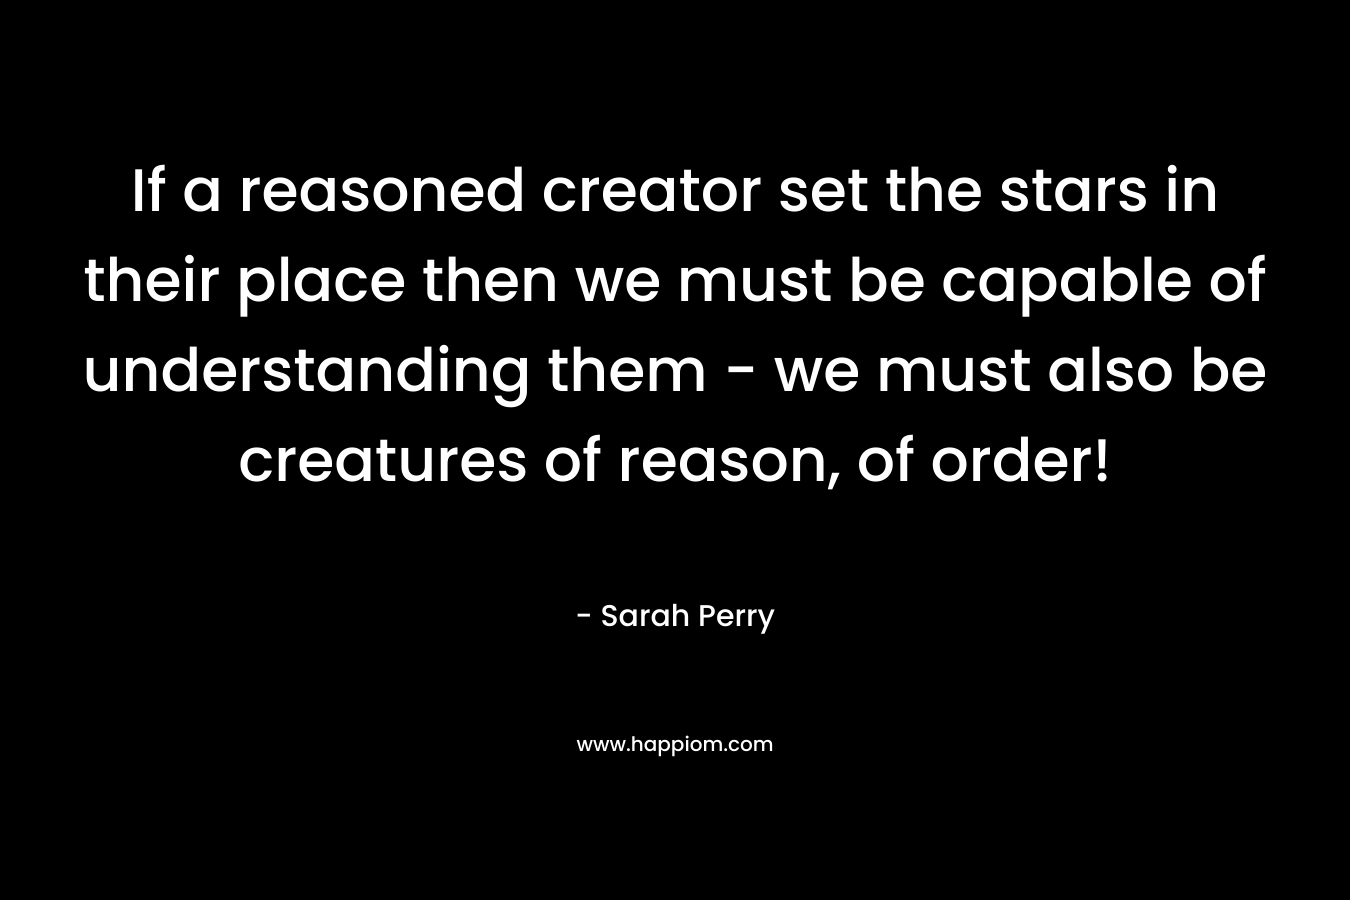 If a reasoned creator set the stars in their place then we must be capable of understanding them - we must also be creatures of reason, of order!